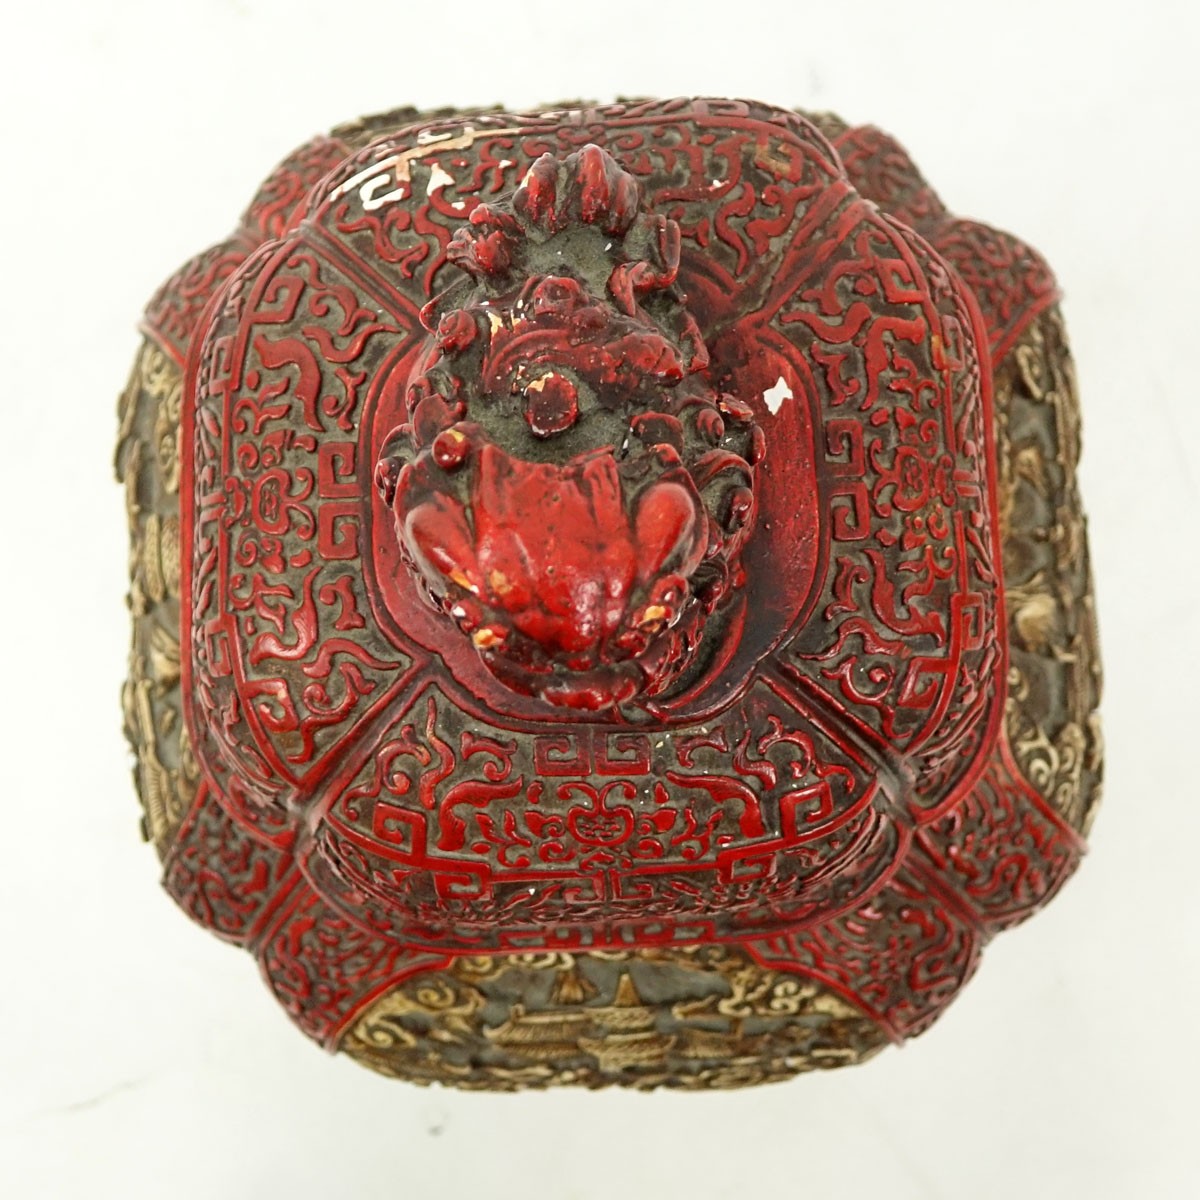 Large Chinese Cinnabar Style Raised Relief Plaster, In the Form of a Covered Urn. A few nicks to surface otherwise good condition.